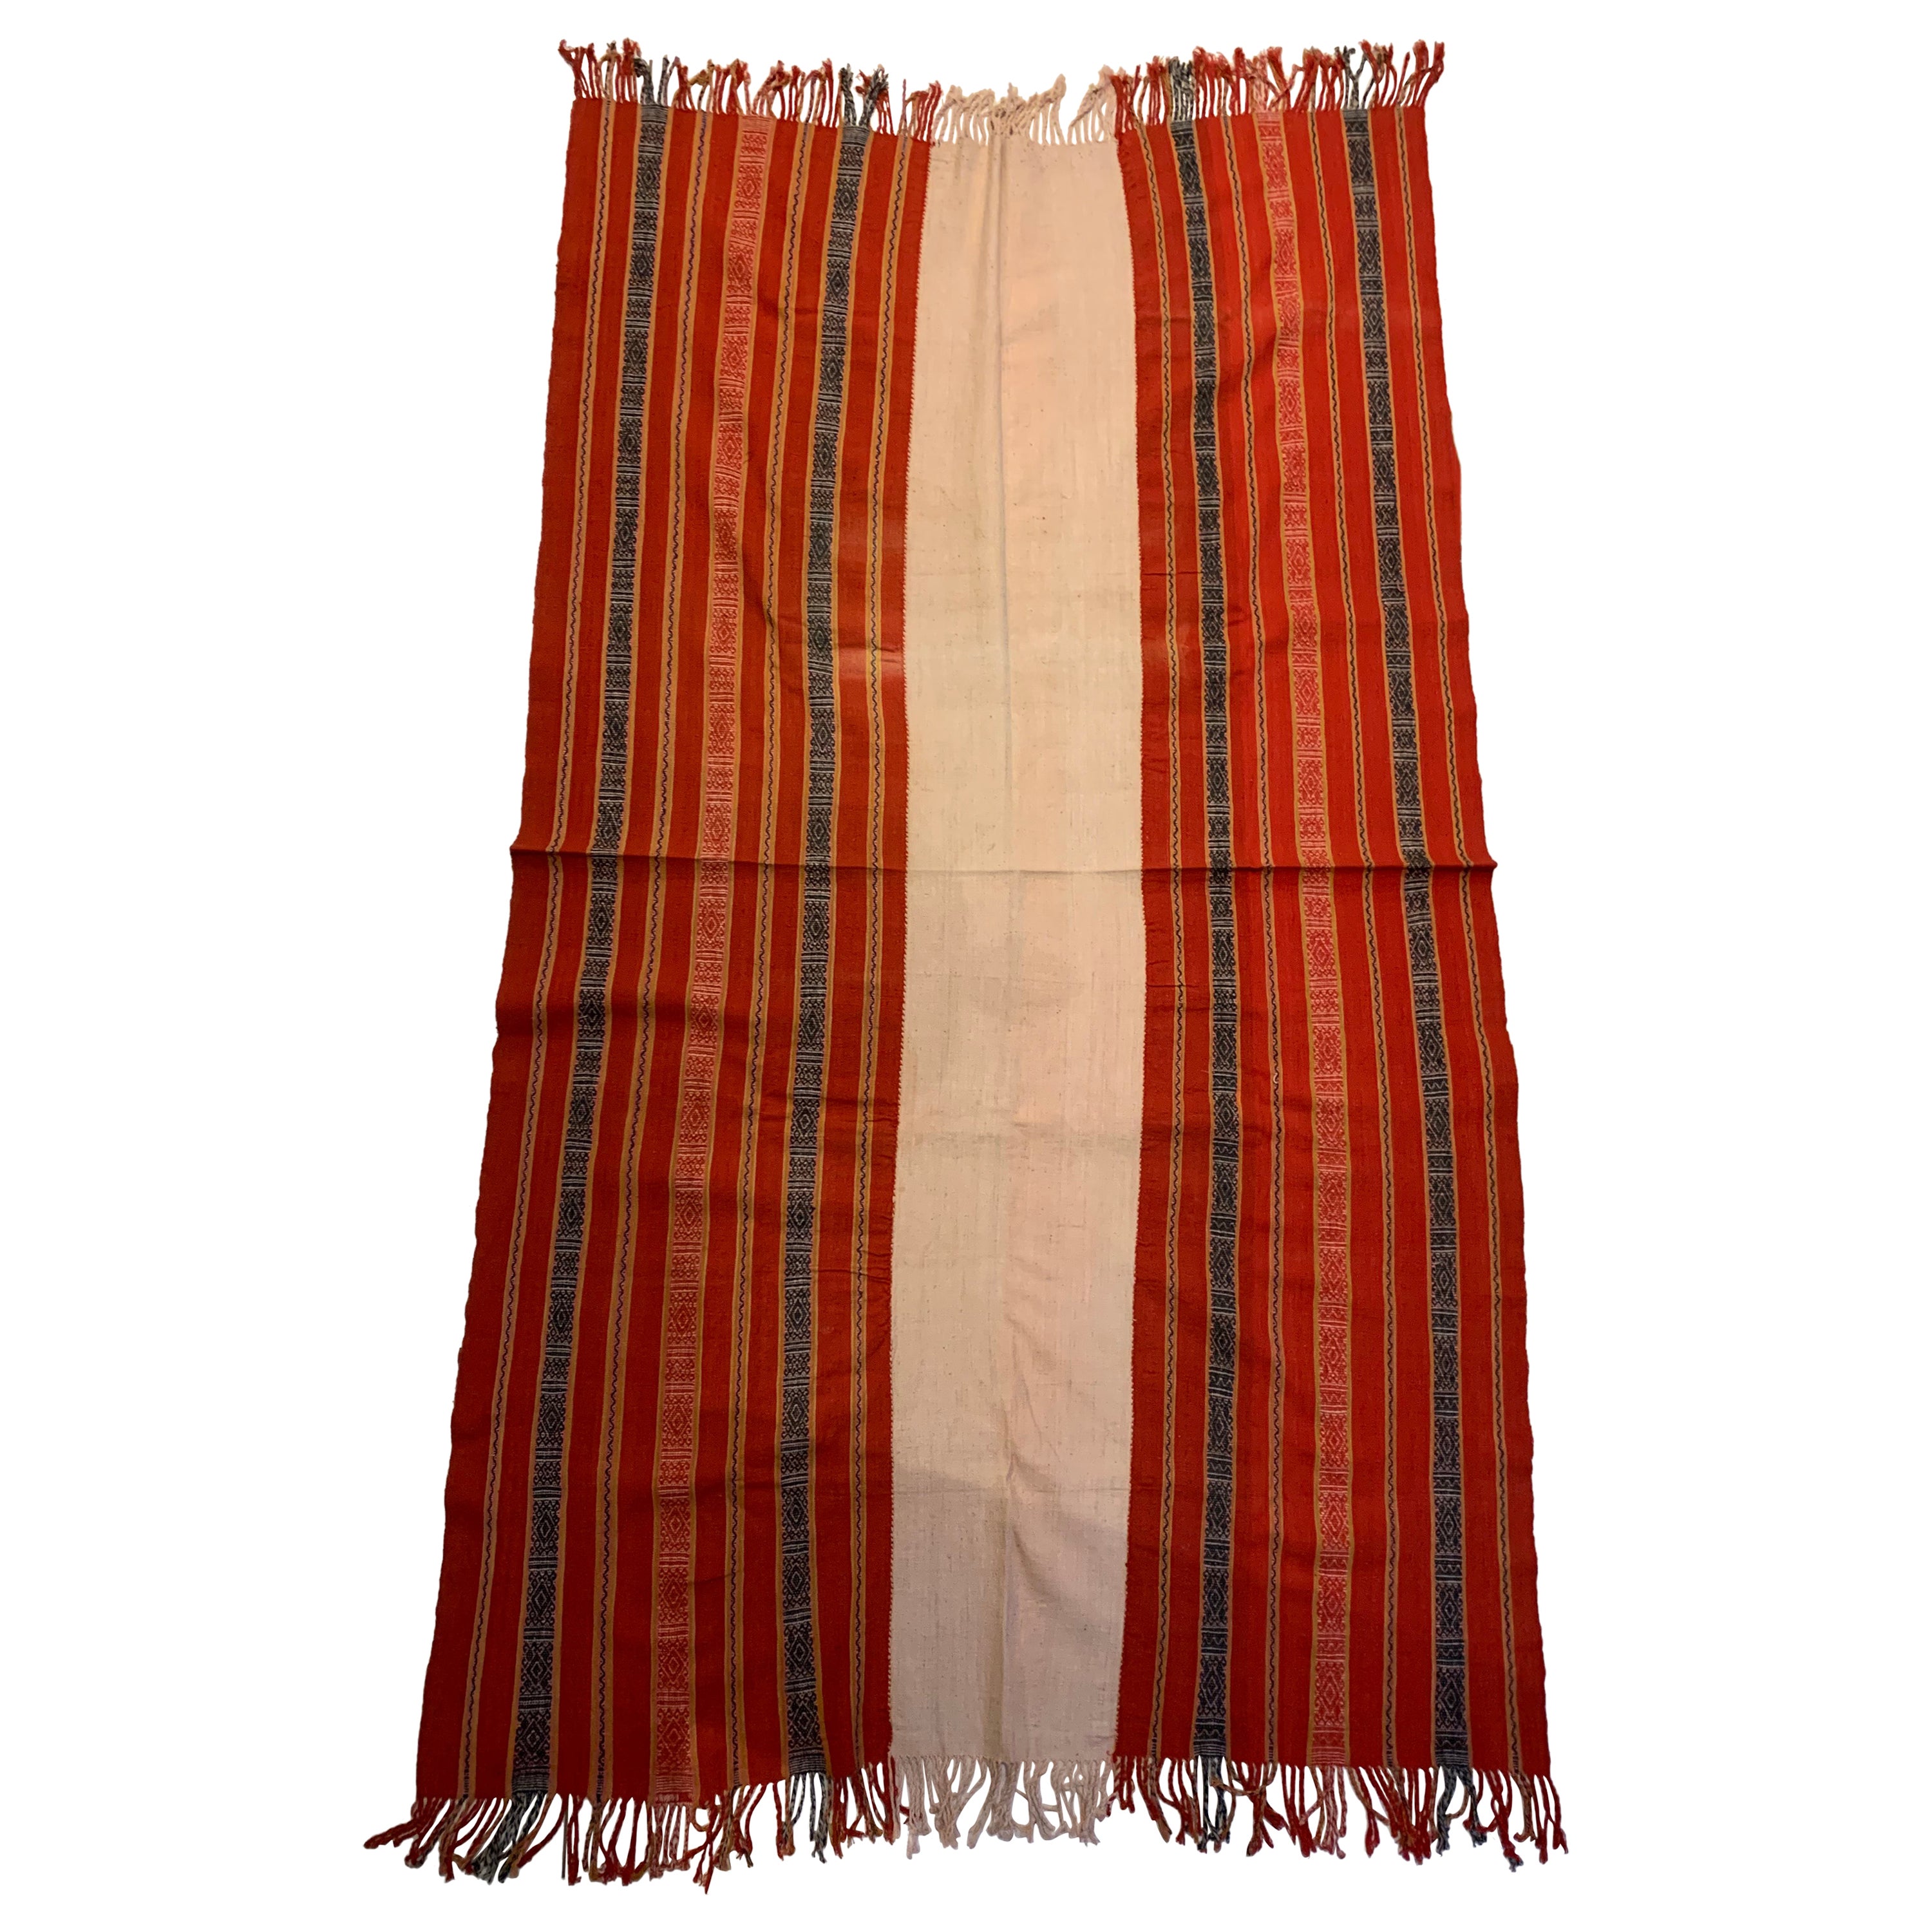 Ikat Textile from Timor Stunning Tribal Motifs & Colors, Indonesia c. 1950